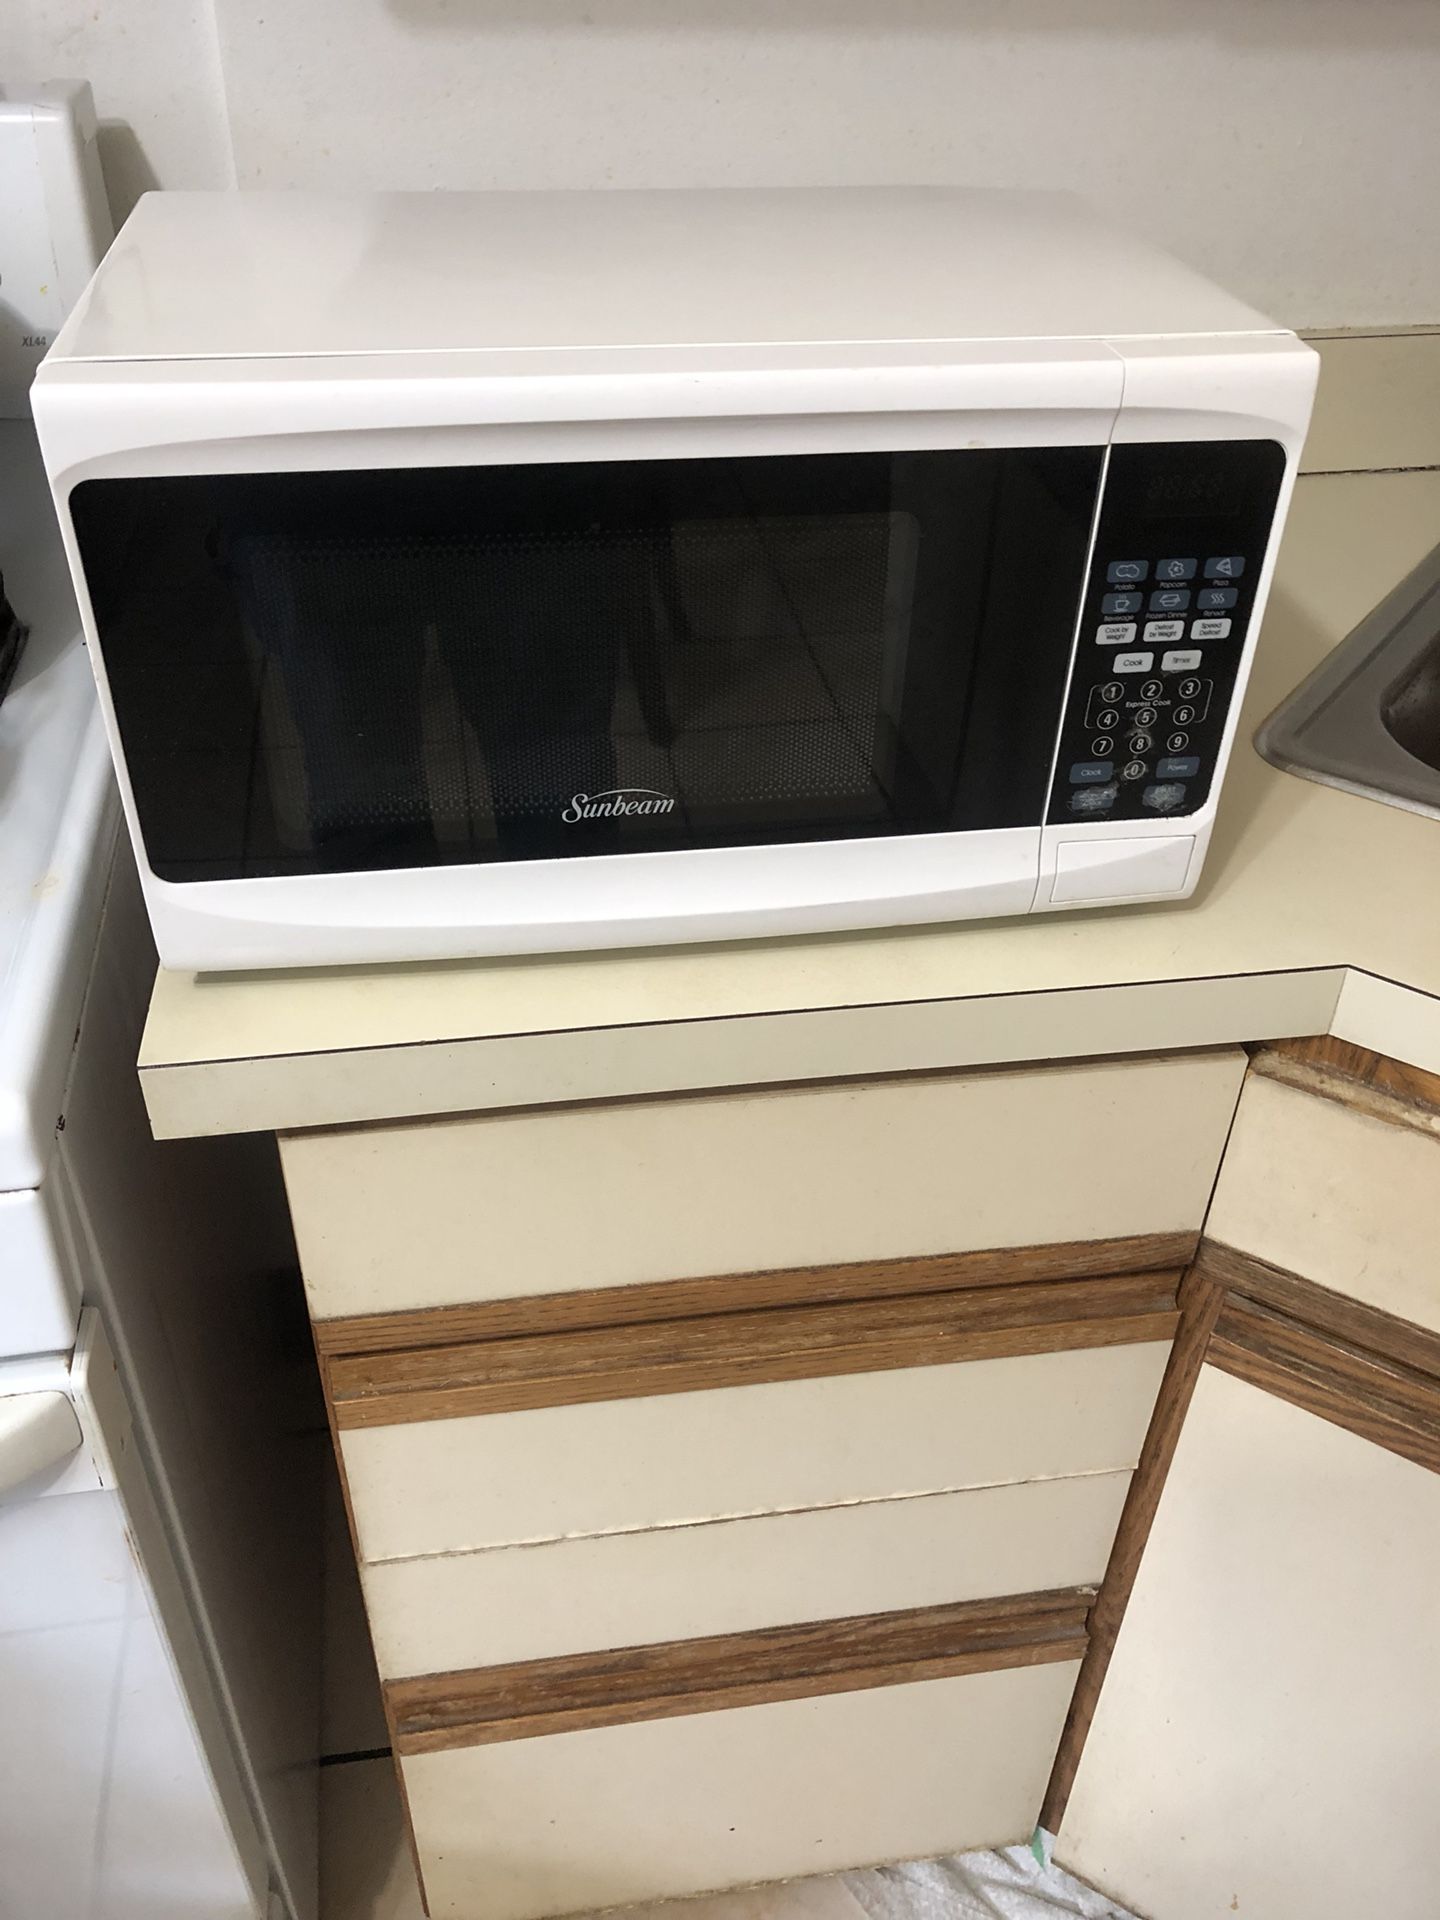 Very good condition microwave